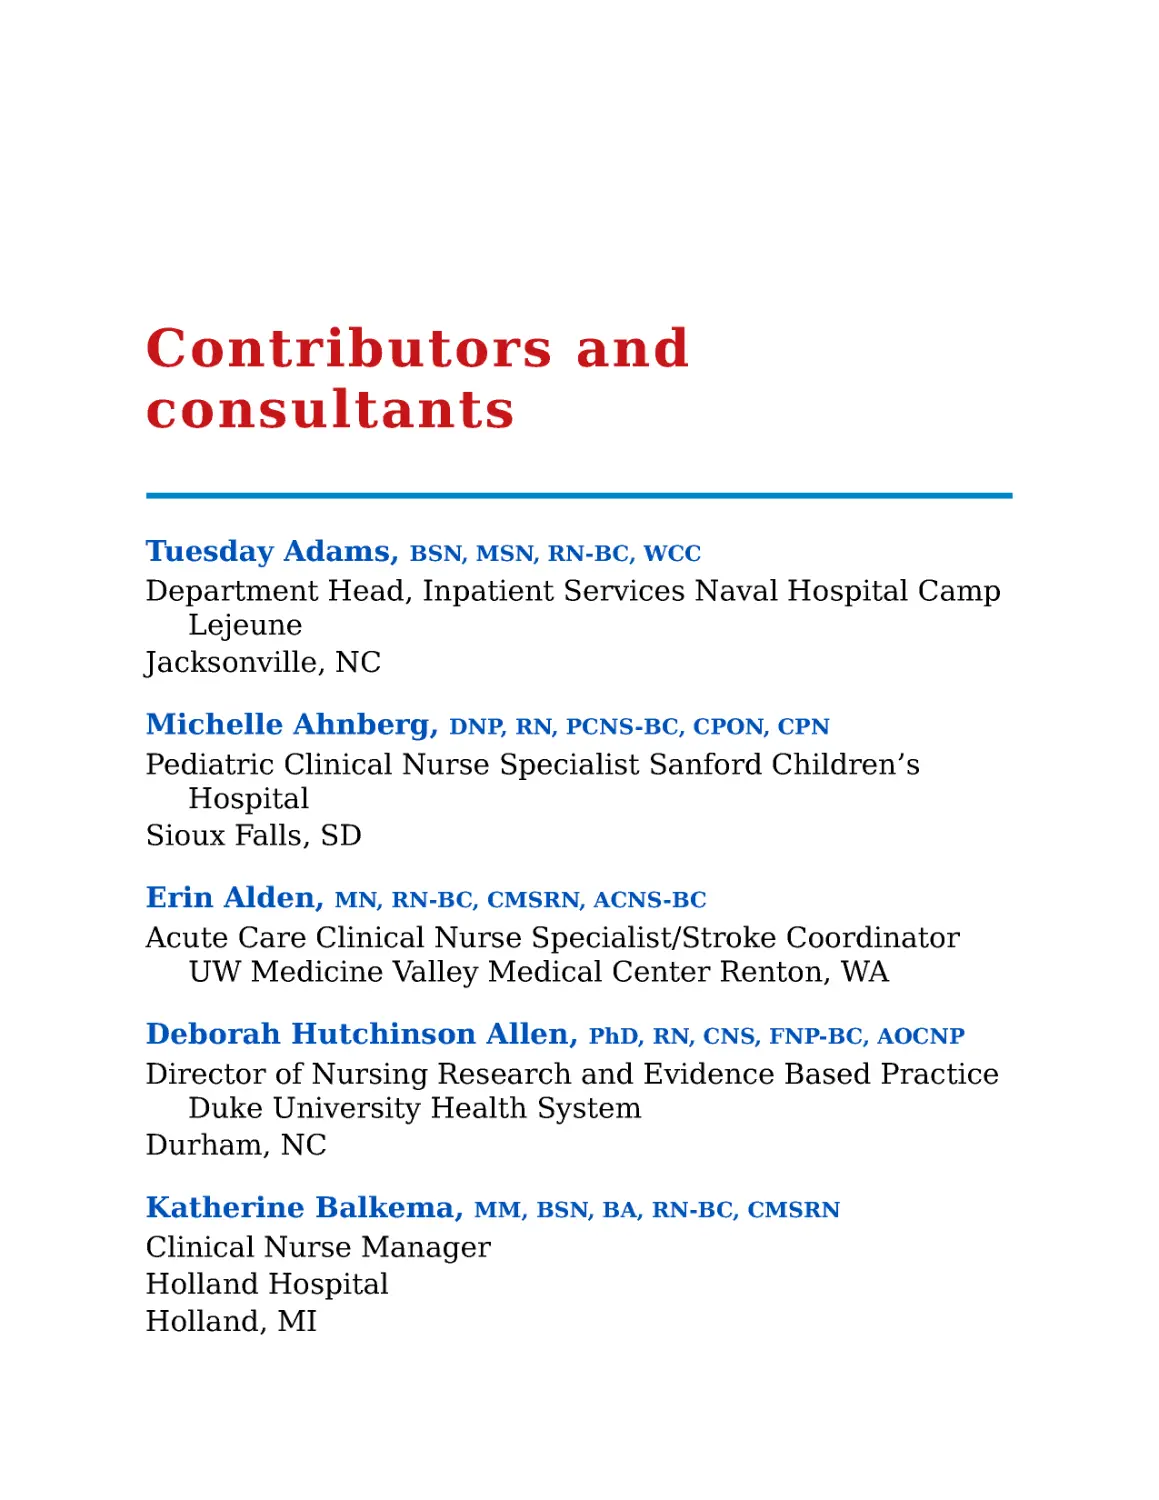 Contributors and consultants